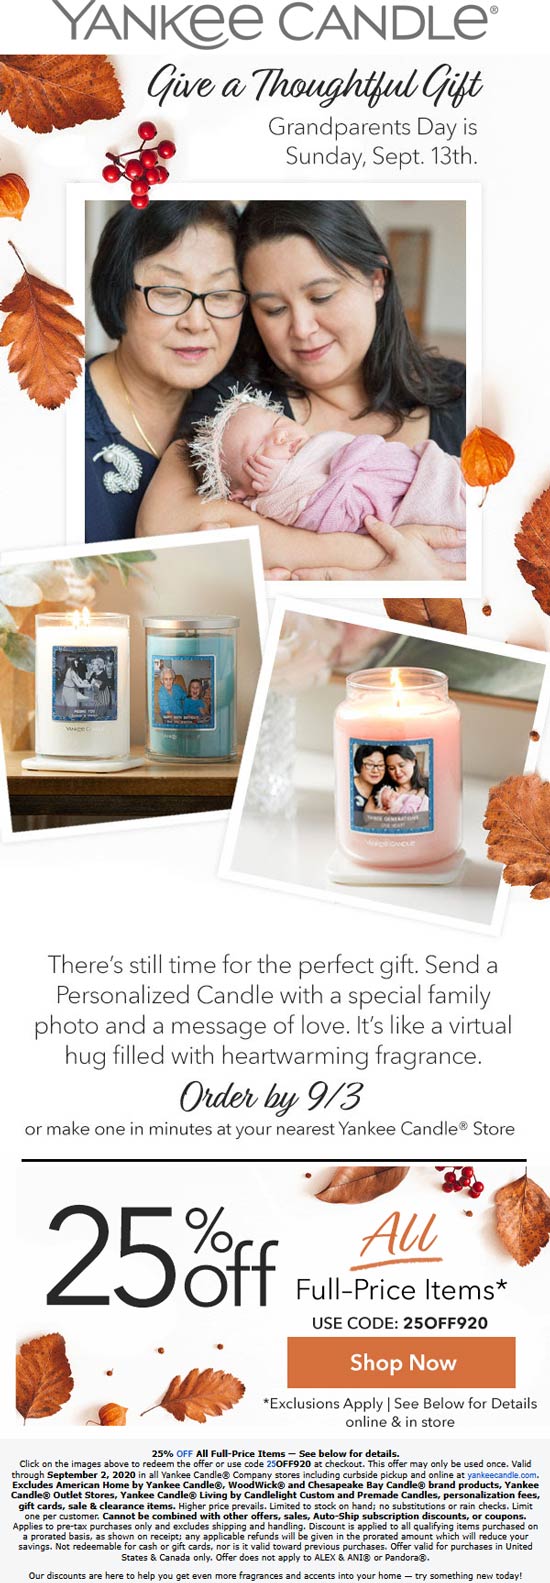 Yankee Candle stores Coupon  25% off at Yankee Candle, or online via promo code 25OFF920 #yankeecandle 